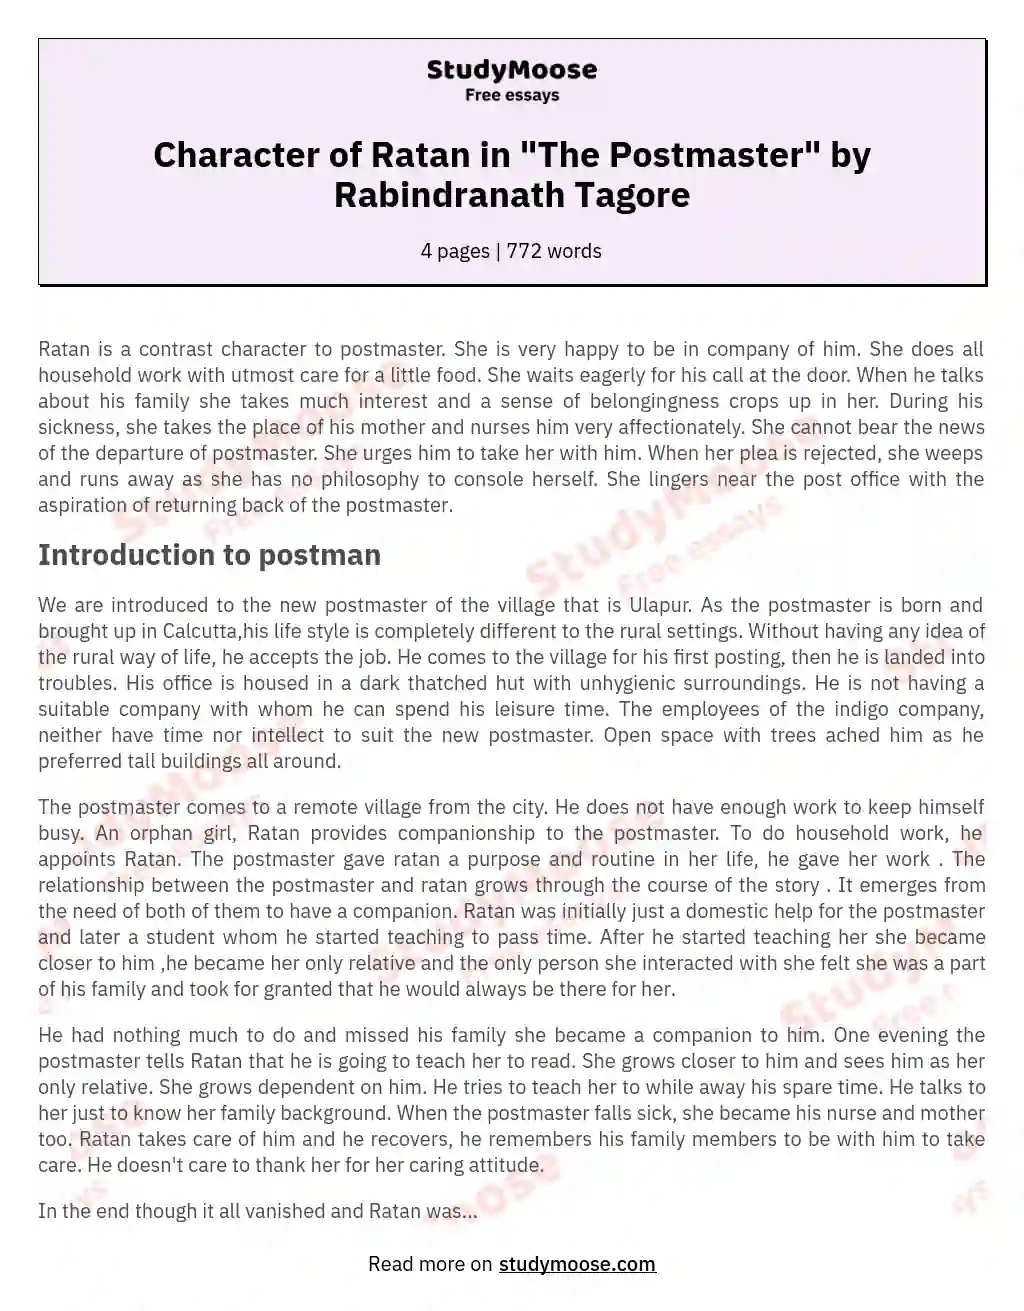 Character of Ratan in "The Postmaster" by Rabindranath Tagore essay